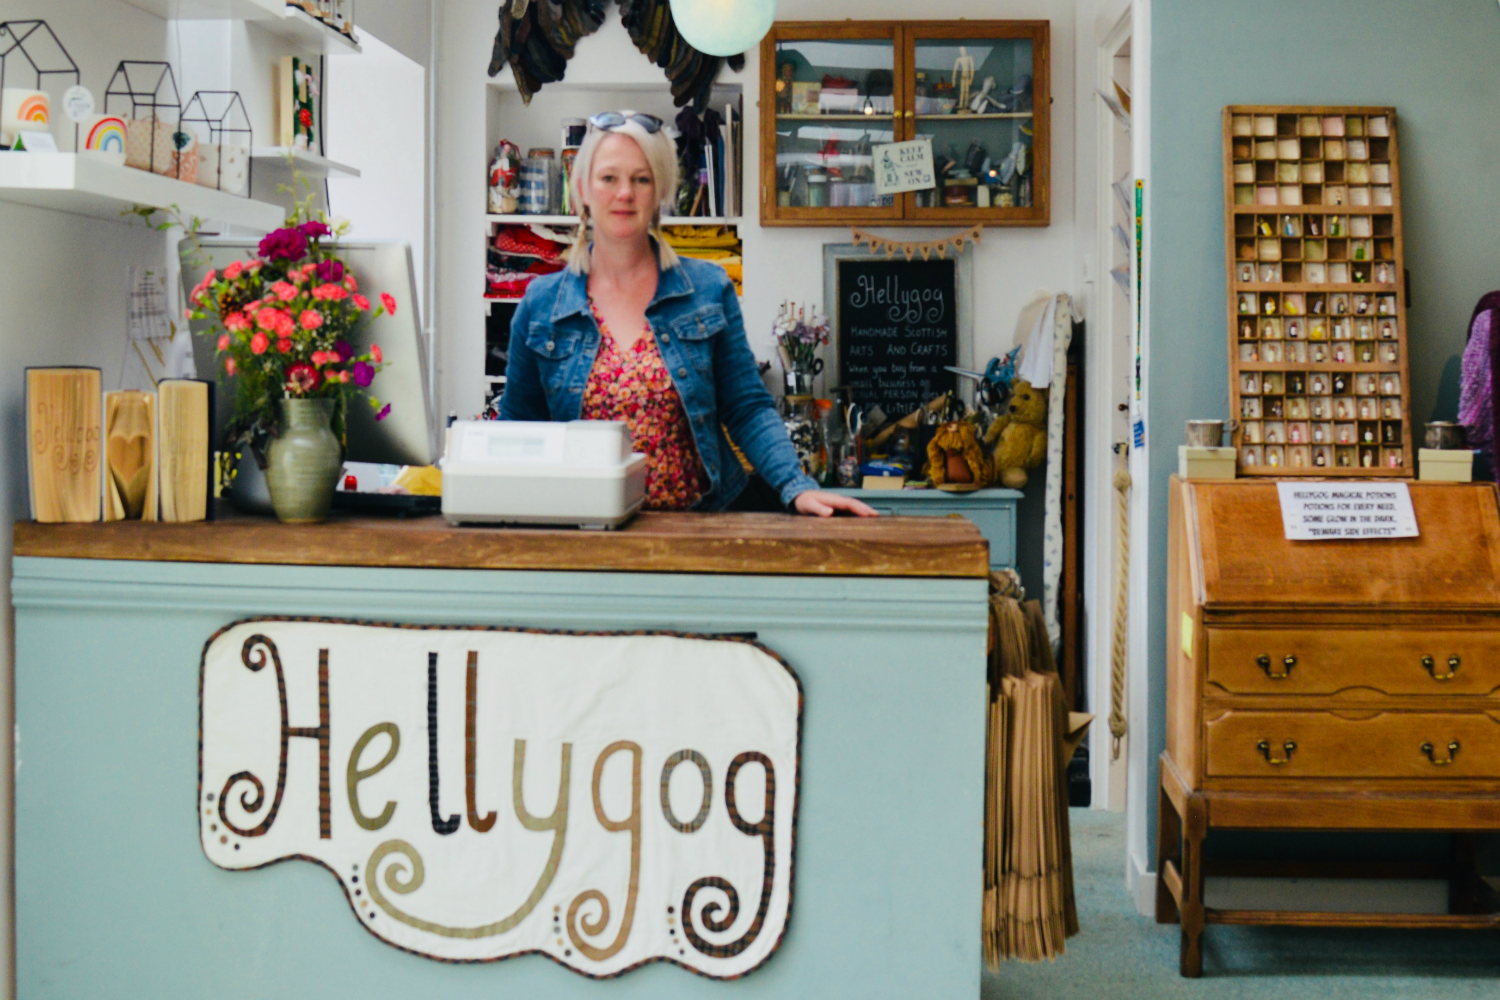 The Hellygog Shop at Logie Steading with owner Jude Simms